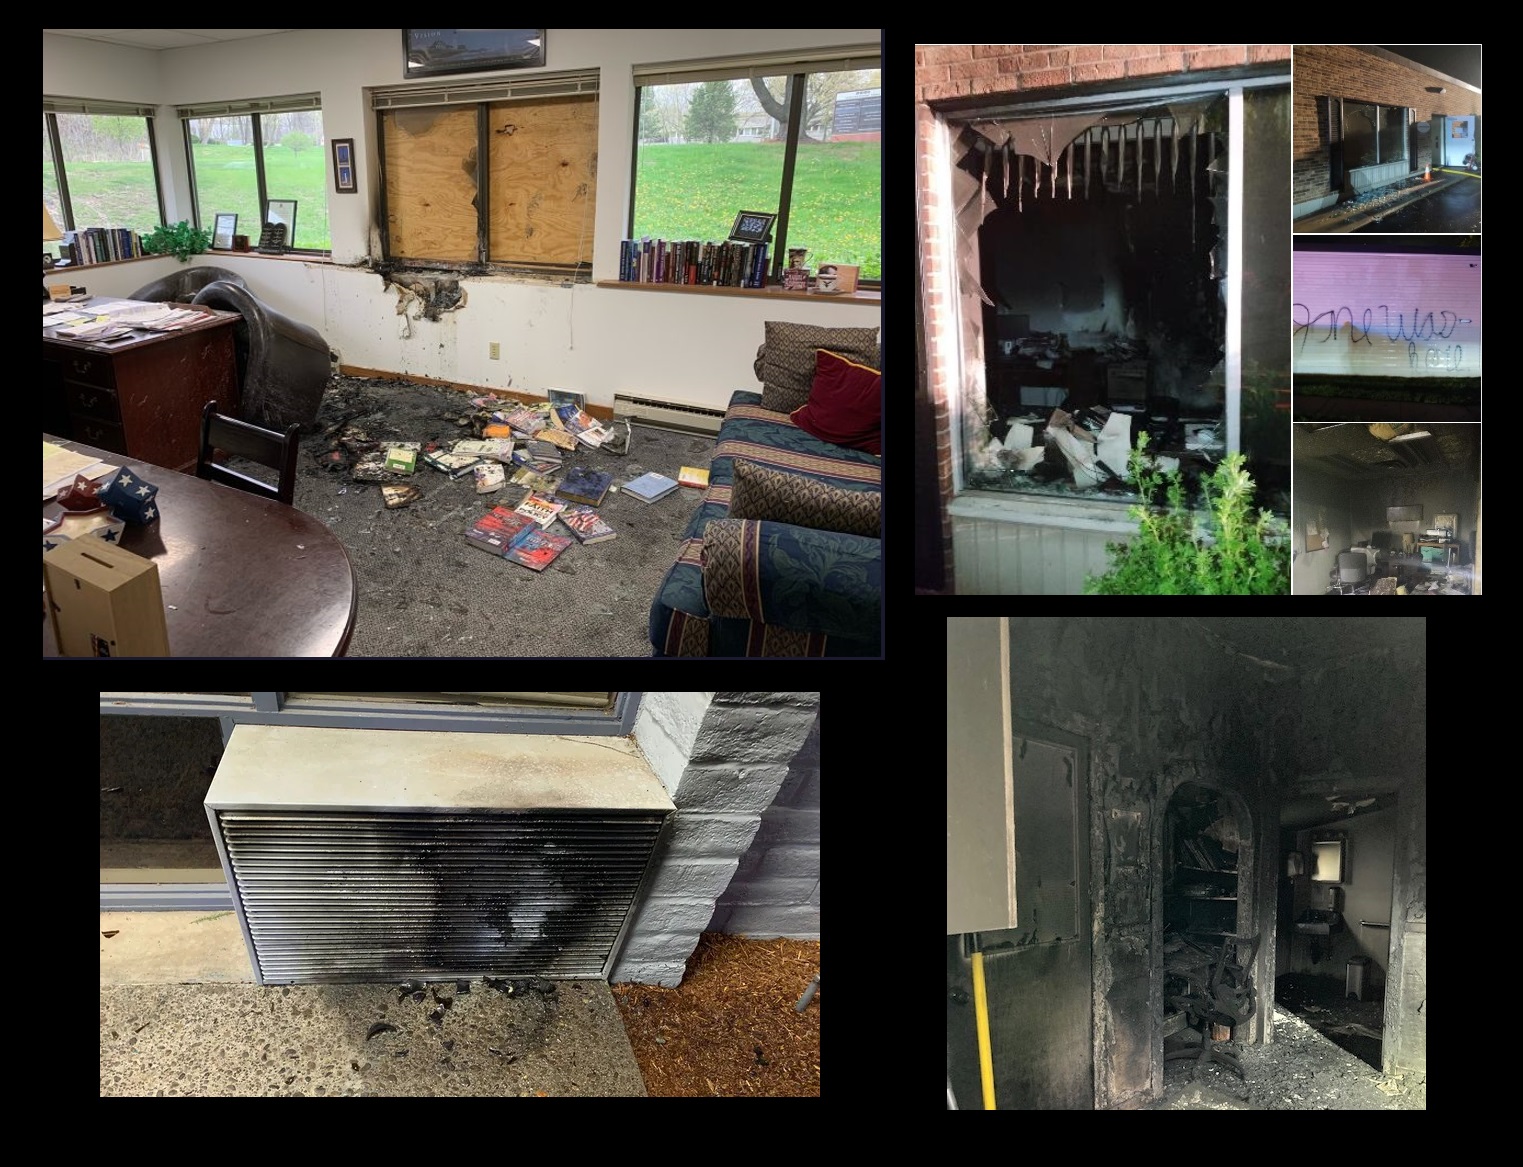 Image: Arson at four pro-life centers among pro-abortion violence following leaked SCOTUS draft opinion